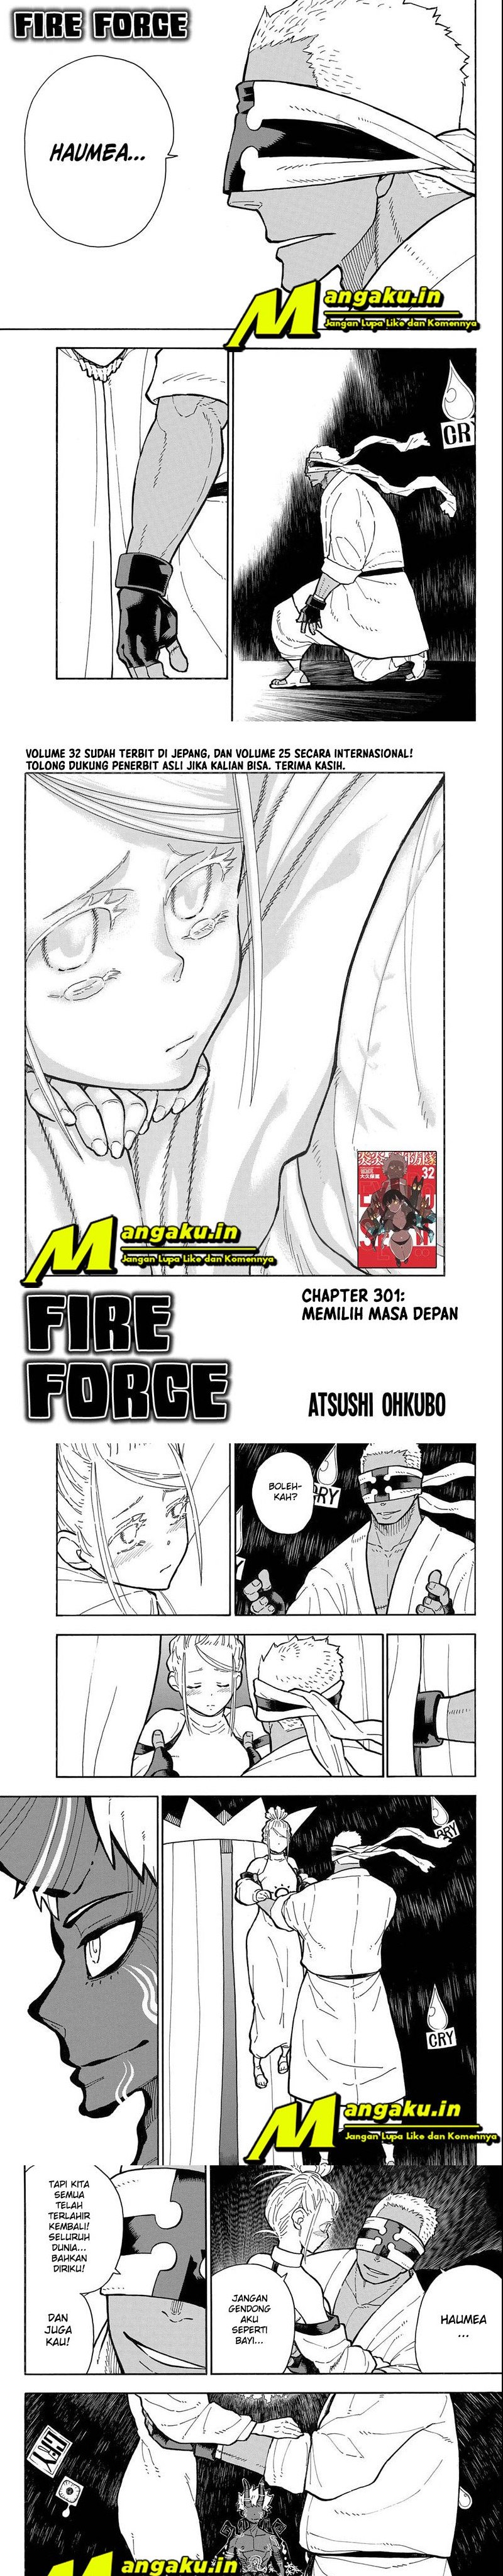 Fire Brigade of Flames Chapter 301